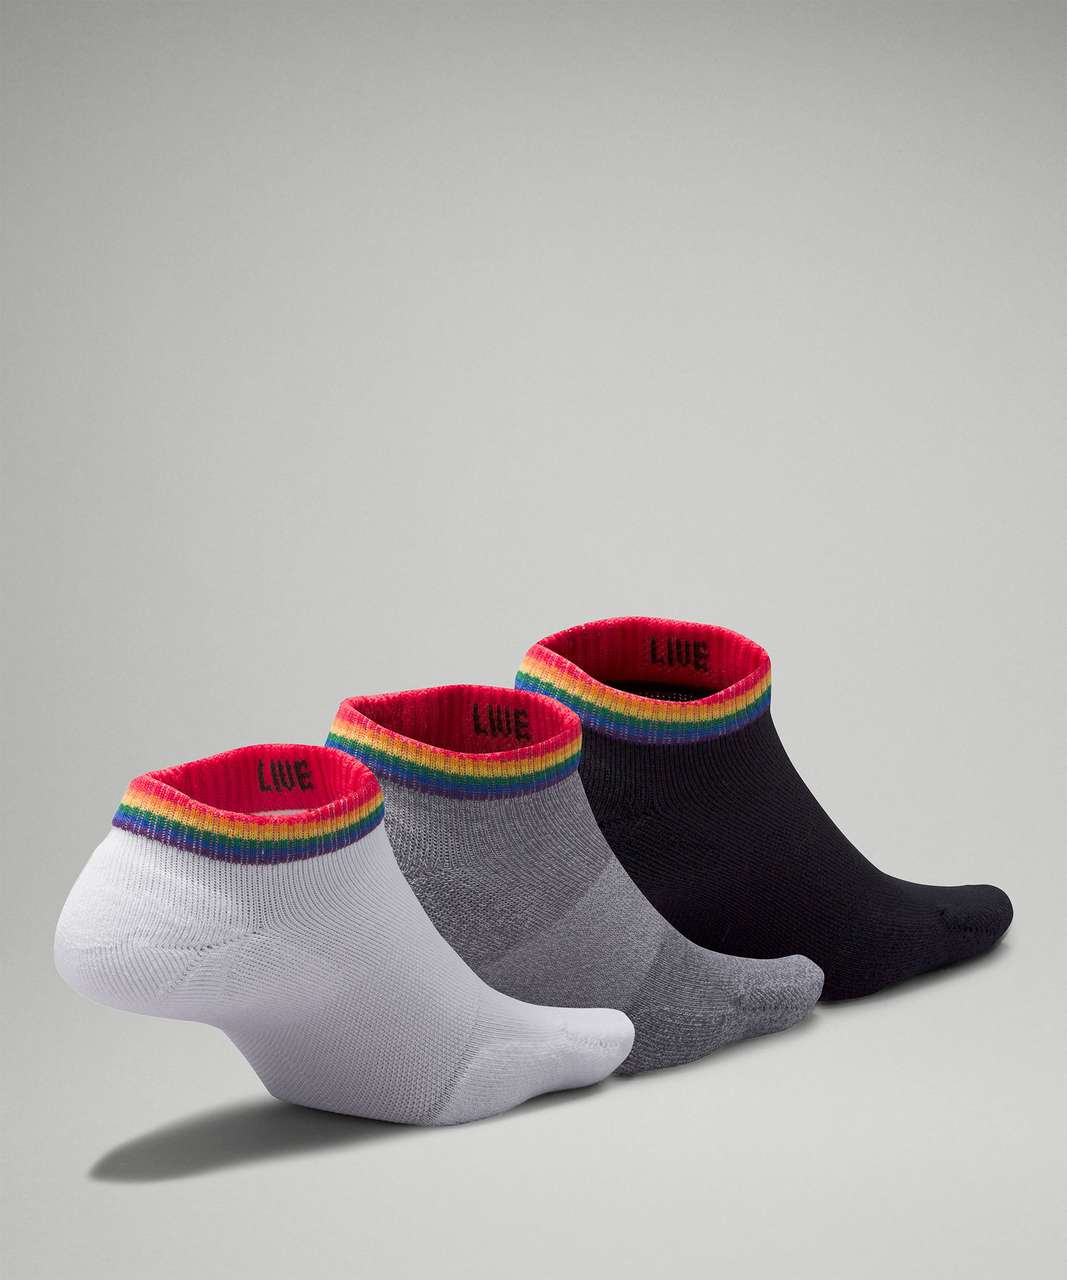 Lululemon Womens Daily Stride Comfort Ankle Sock *3 Pack - White / Heather Grey / Black (First Release)